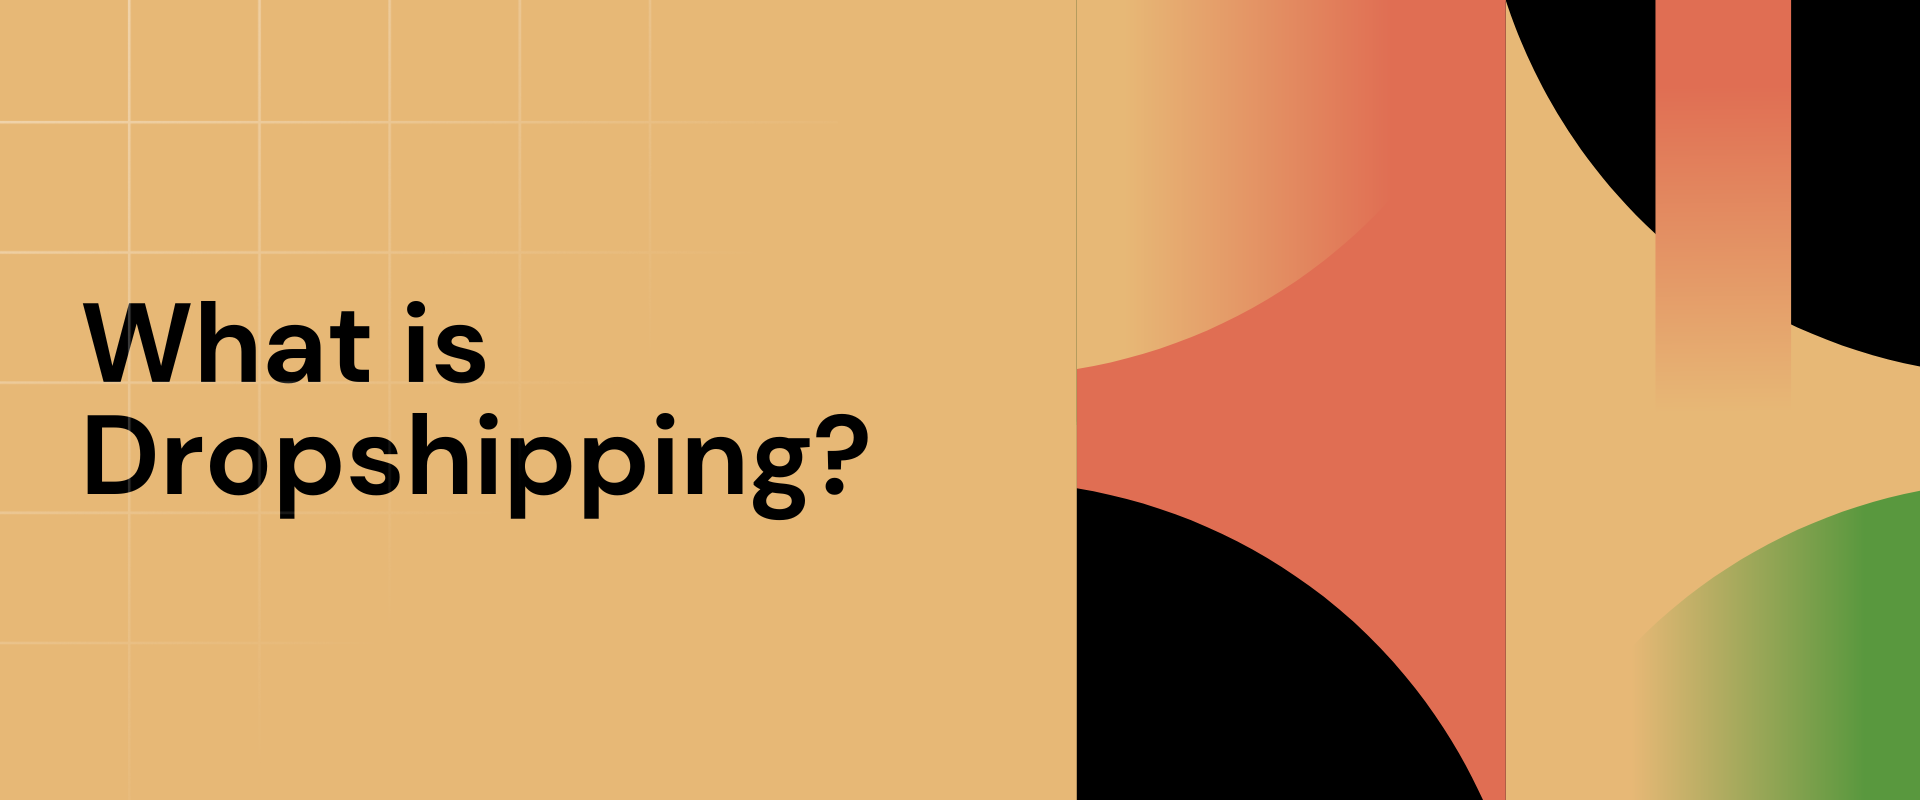 What is Dropshipping? And How Does Dropshipping Works?